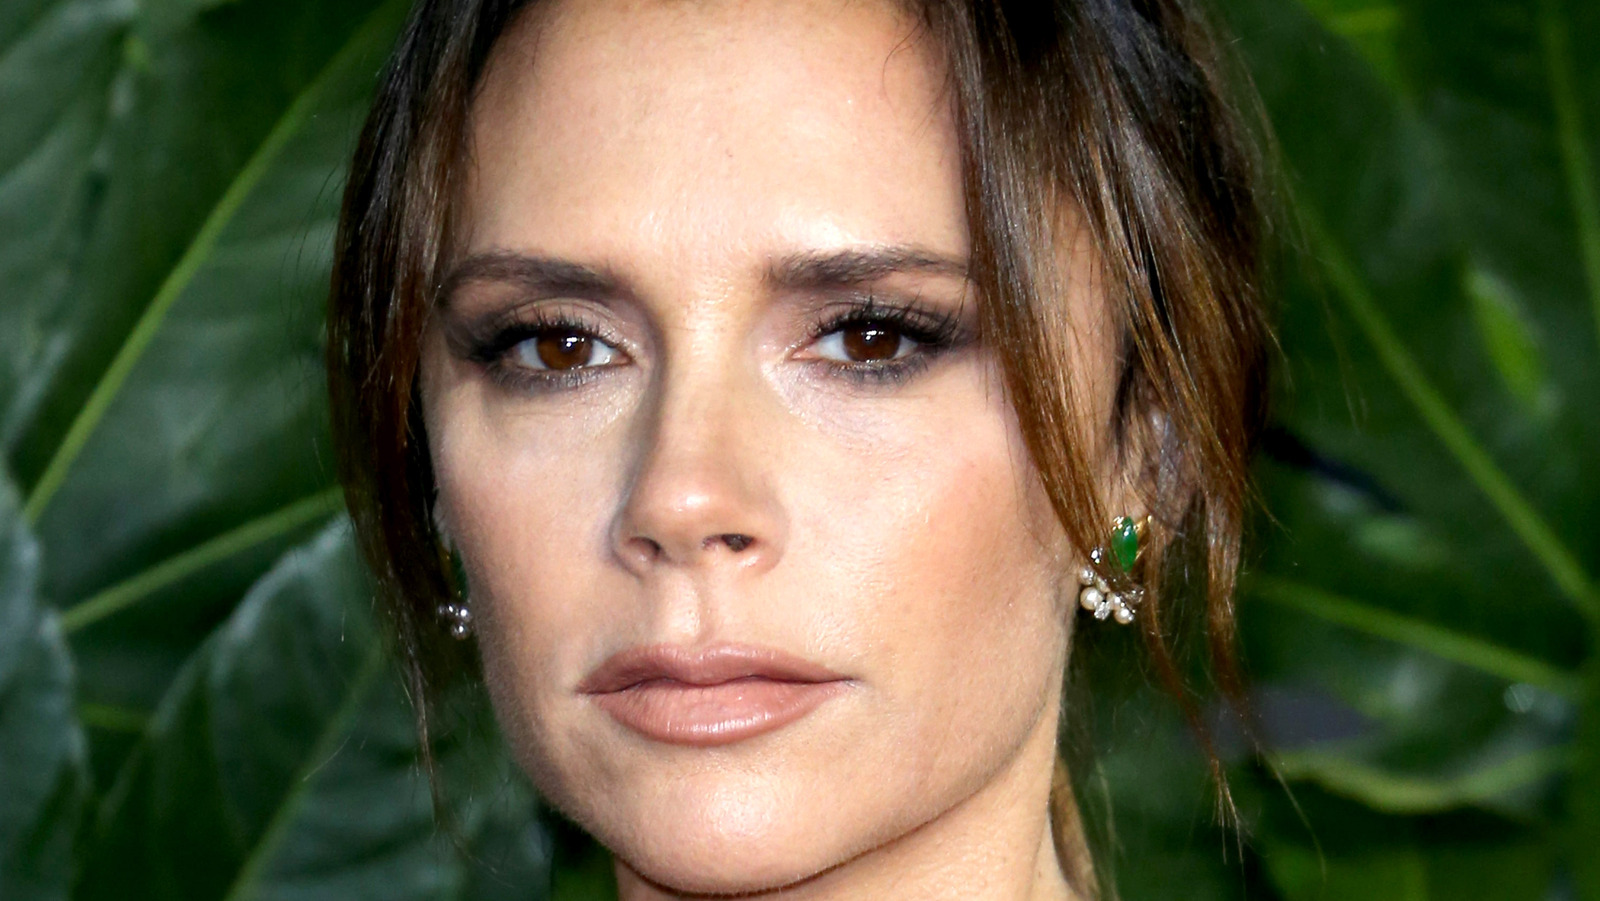 Victoria Beckham's Latest Appearance Has Fans Concerned. Here's Why